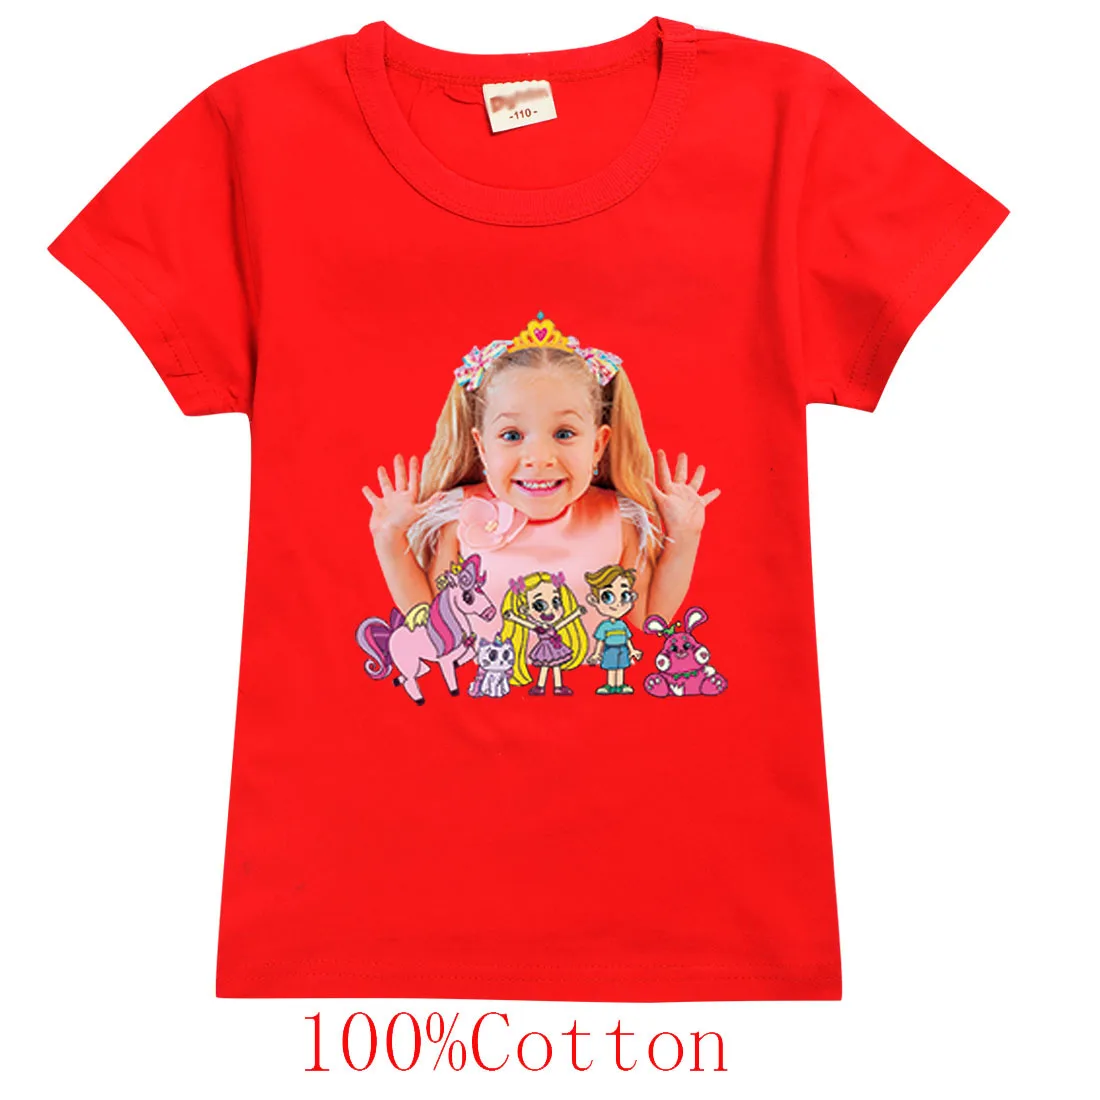 

Roma and Diana Show Clothes Kids Short Sleeve T-shirts Baby Girls Cotton Tops Teenager Boys Pullover Tshirts Children's Clothing